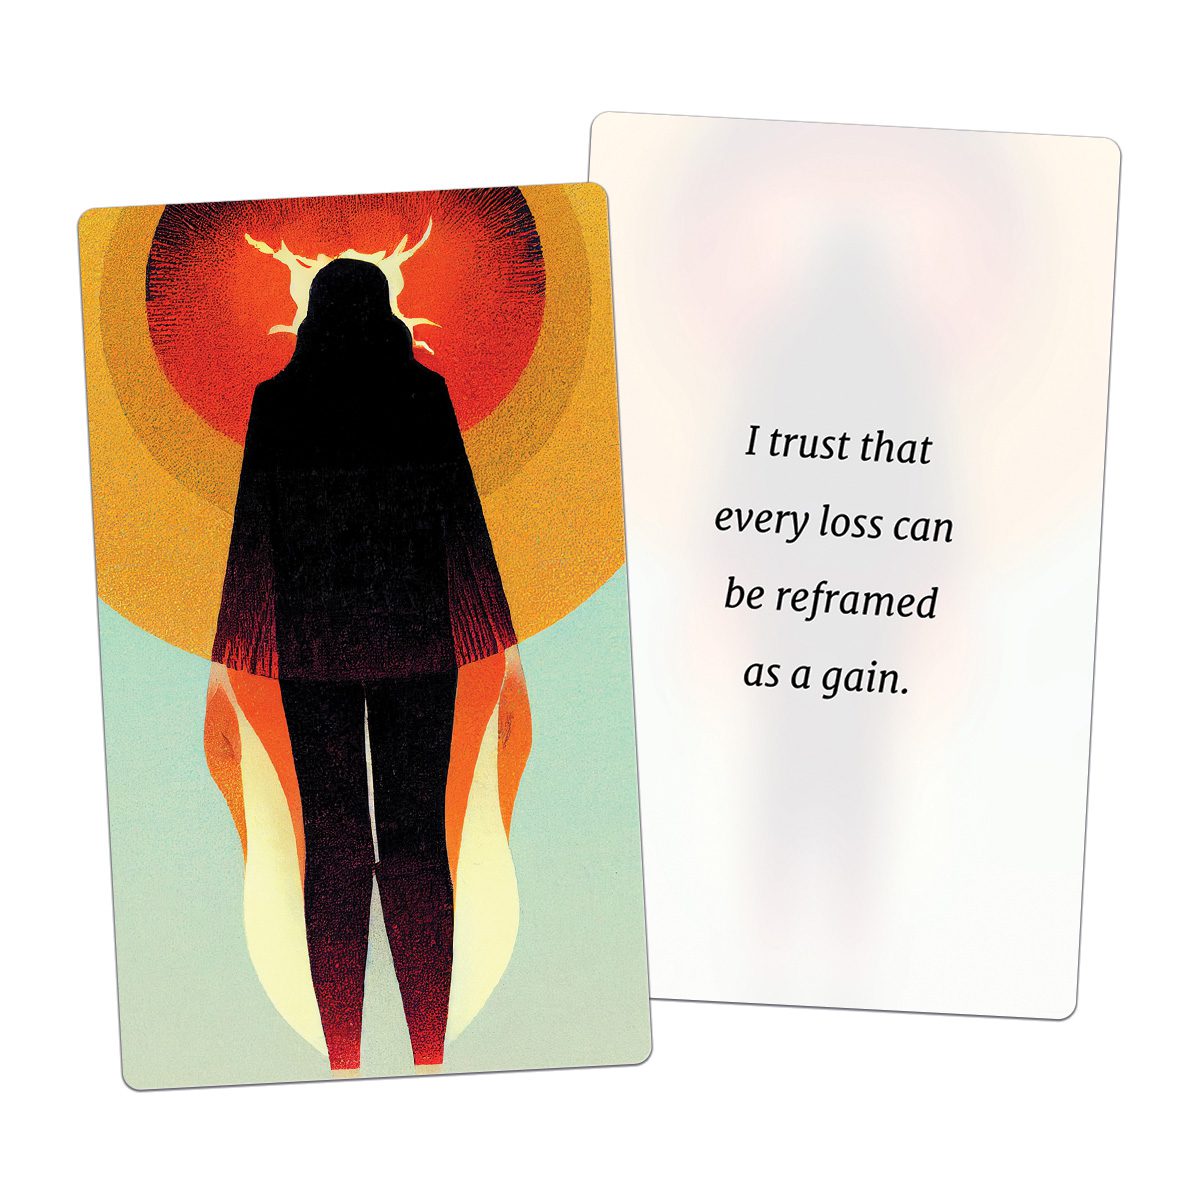 I trust that every loss can be reframed as a gain. (AFFIRMATION CARD)